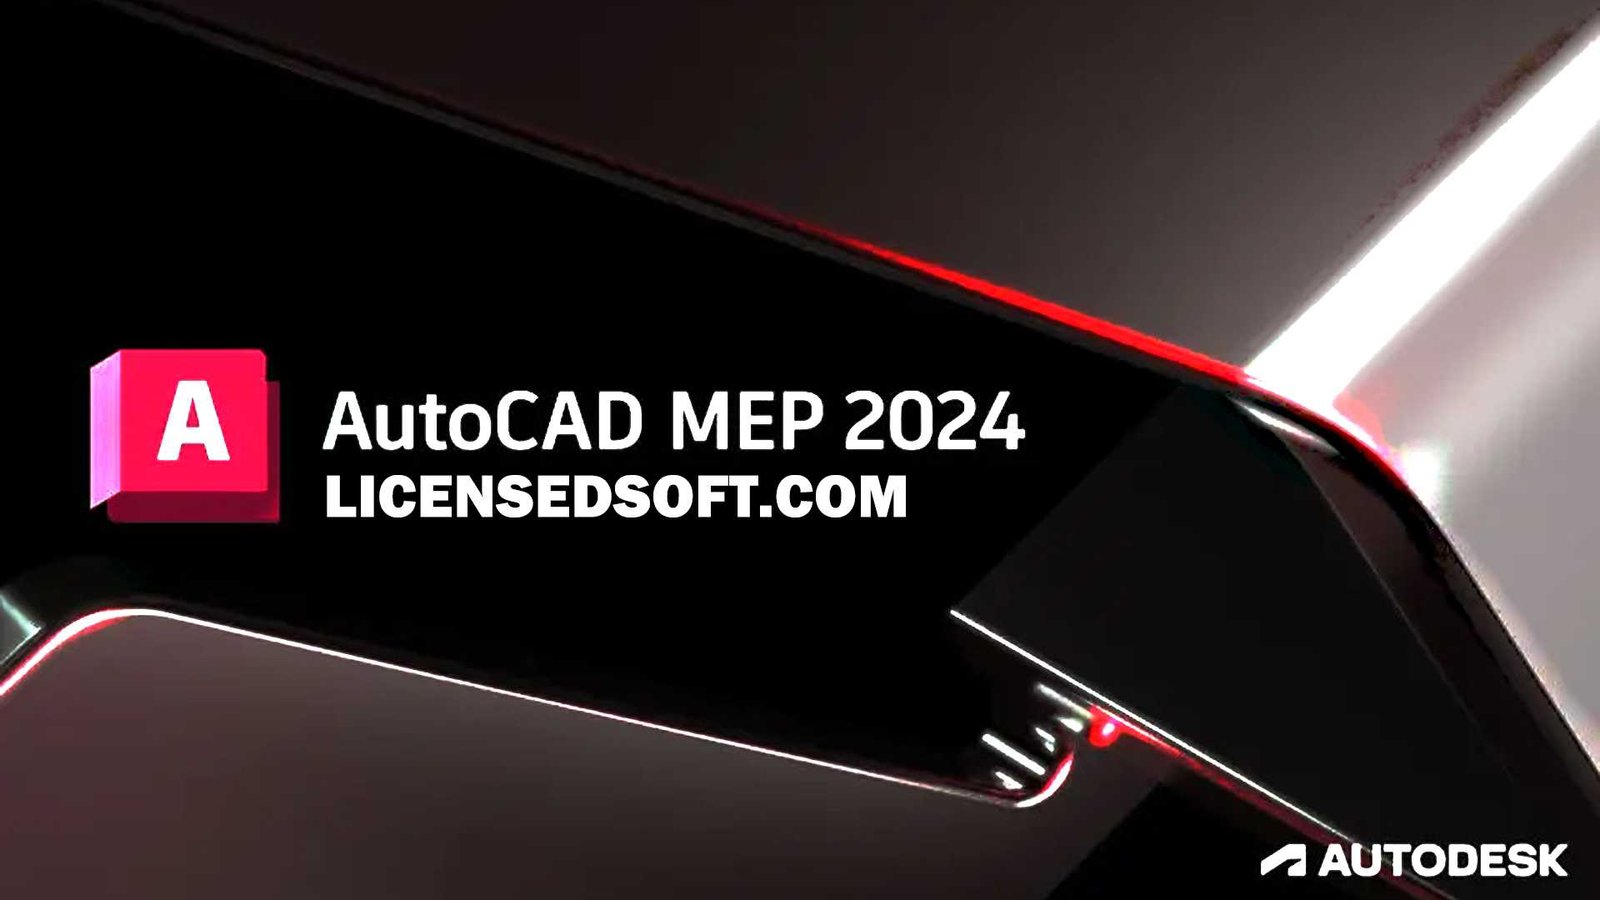 Autodesk AutoCAD MEP 2024 Cover By LicensedSoft